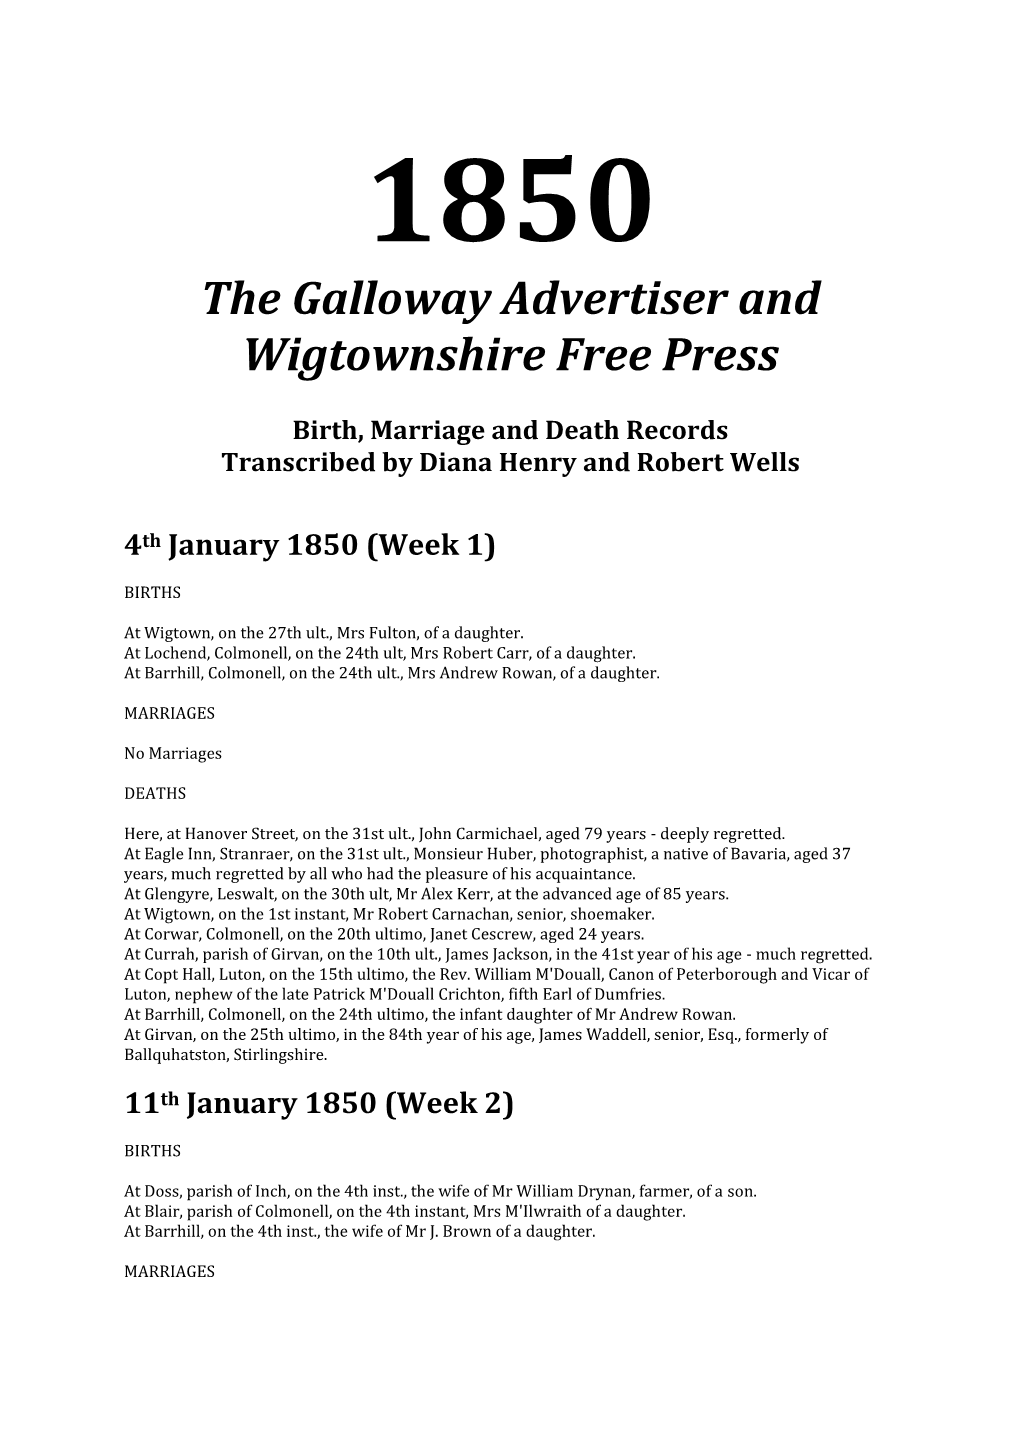 1850 the Galloway Advertiser and Wigtownshire Free Press